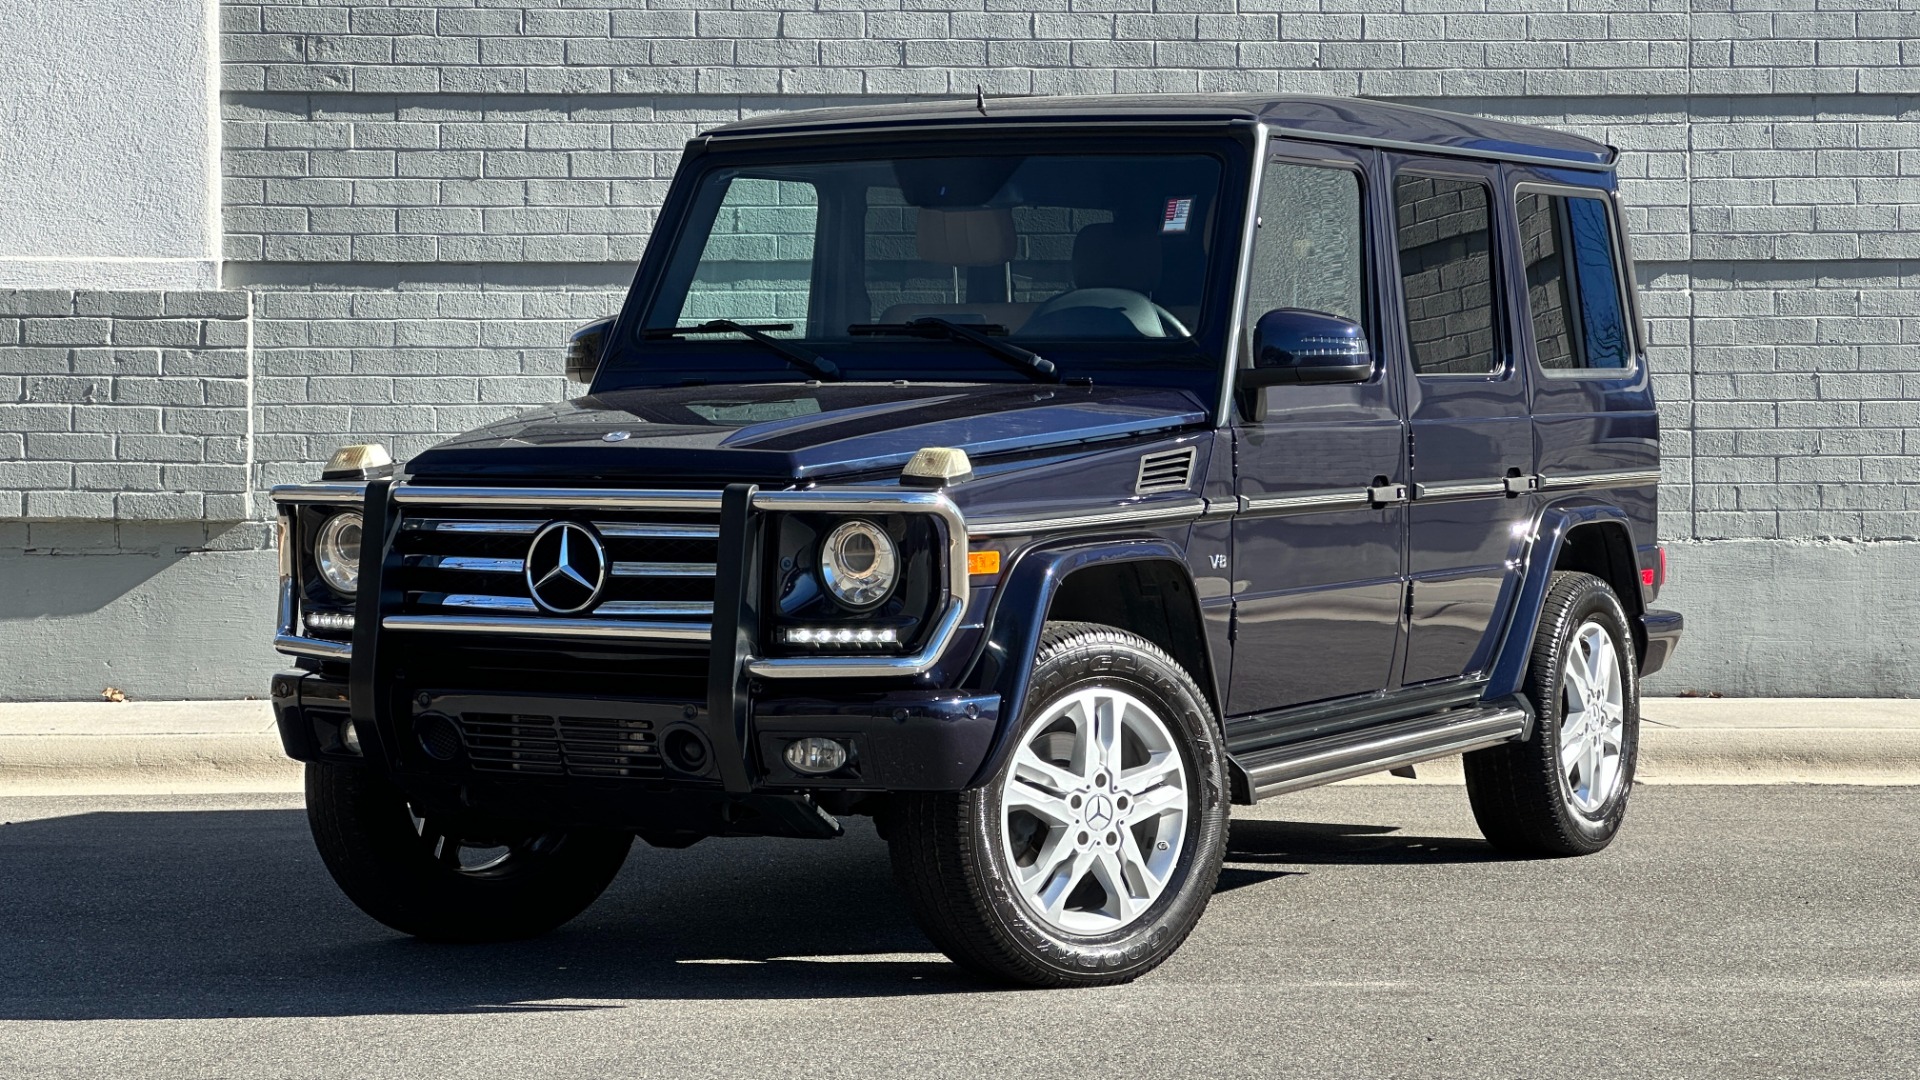 Used 2015 Mercedes-Benz G-Class G550 / DESIGNO NAPPA LEATHER / DESIGNO HEADLINER / HEATED STEERING / NAV /  for sale Sold at Formula Imports in Charlotte NC 28227 1